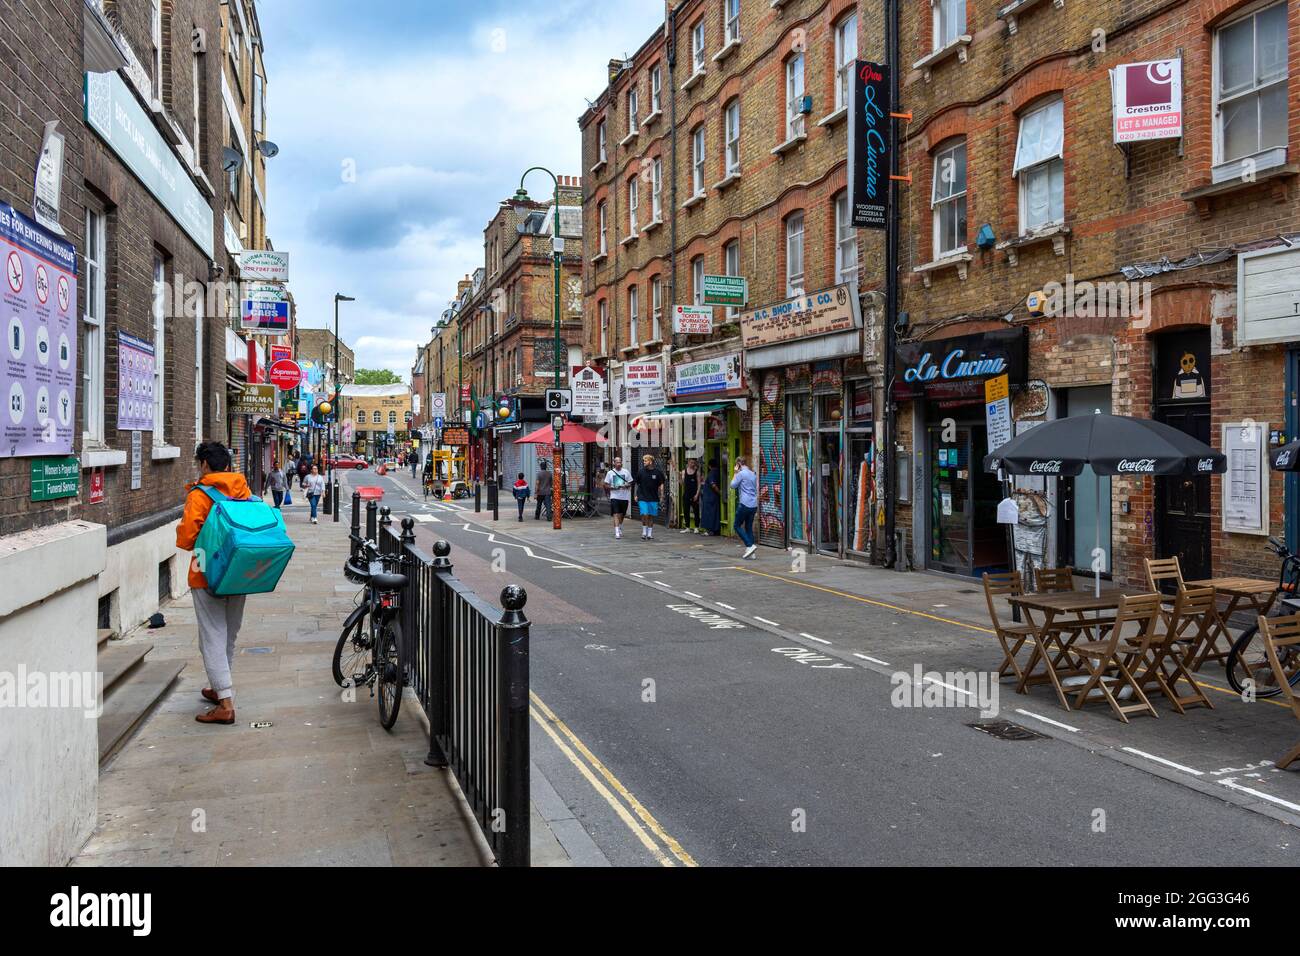 LONDON ARTISTIC AND CULTURAL AREA AROUND BRICK LANE WITH CREATIVE DESIGNS AND SLOGANS JUST EAT DELIVERY MAN Stock Photo